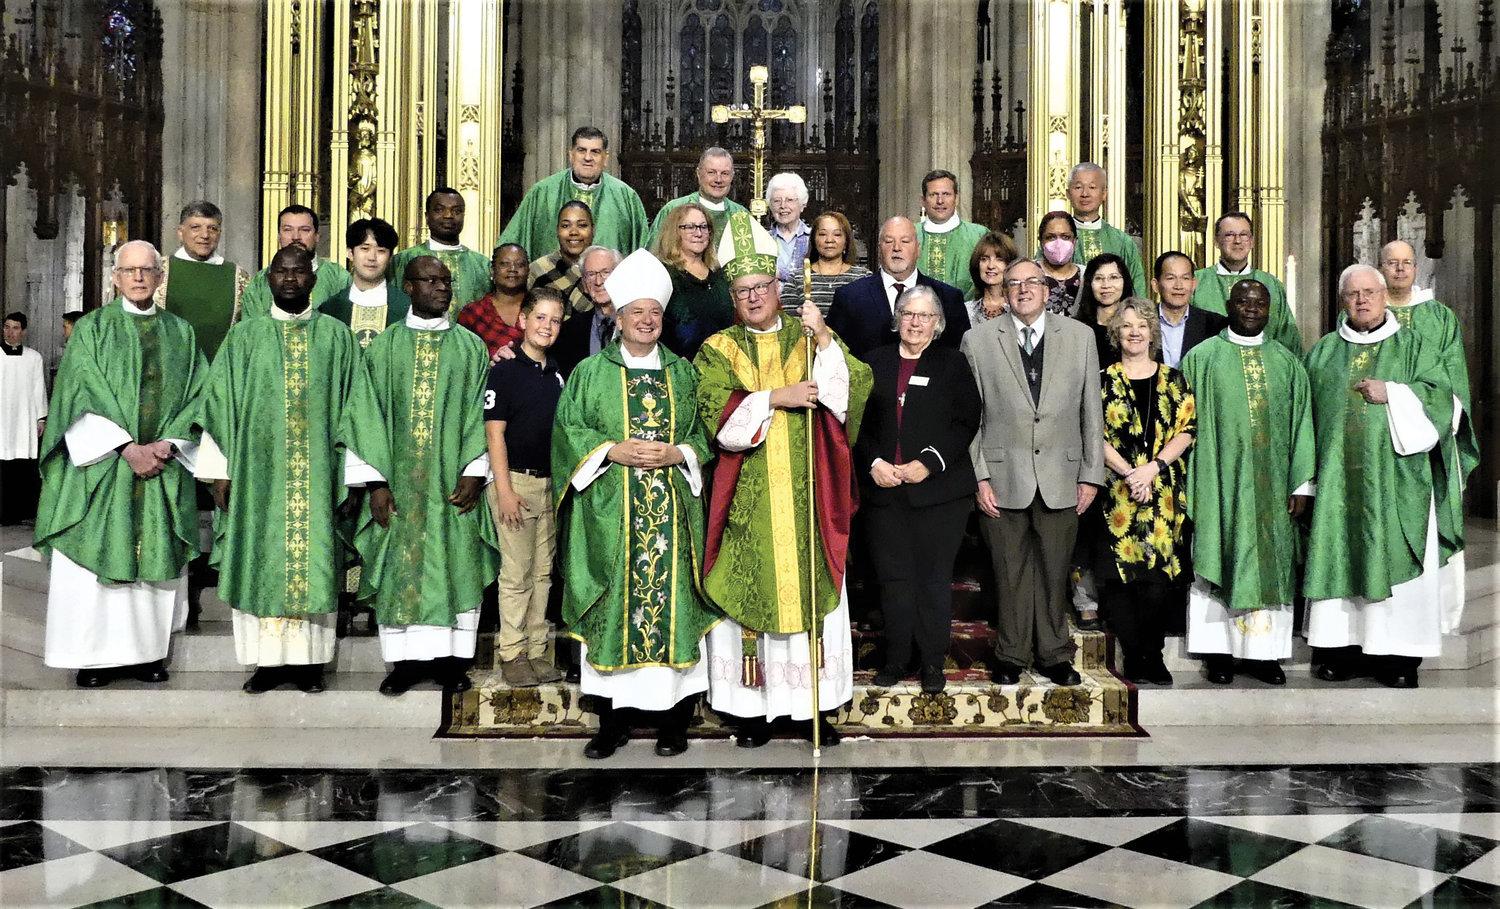 Clergy, mission leaders and staff members gather at St. Patrick’s Cathedral with Cardinal Dolan, the principal celebrant, following the Oct 23 World Mission Sunday Mass. Next to the cardinal is Archbishop Anthony Fisher, O.P., of Sydney, Australia, who was a concelebrant.